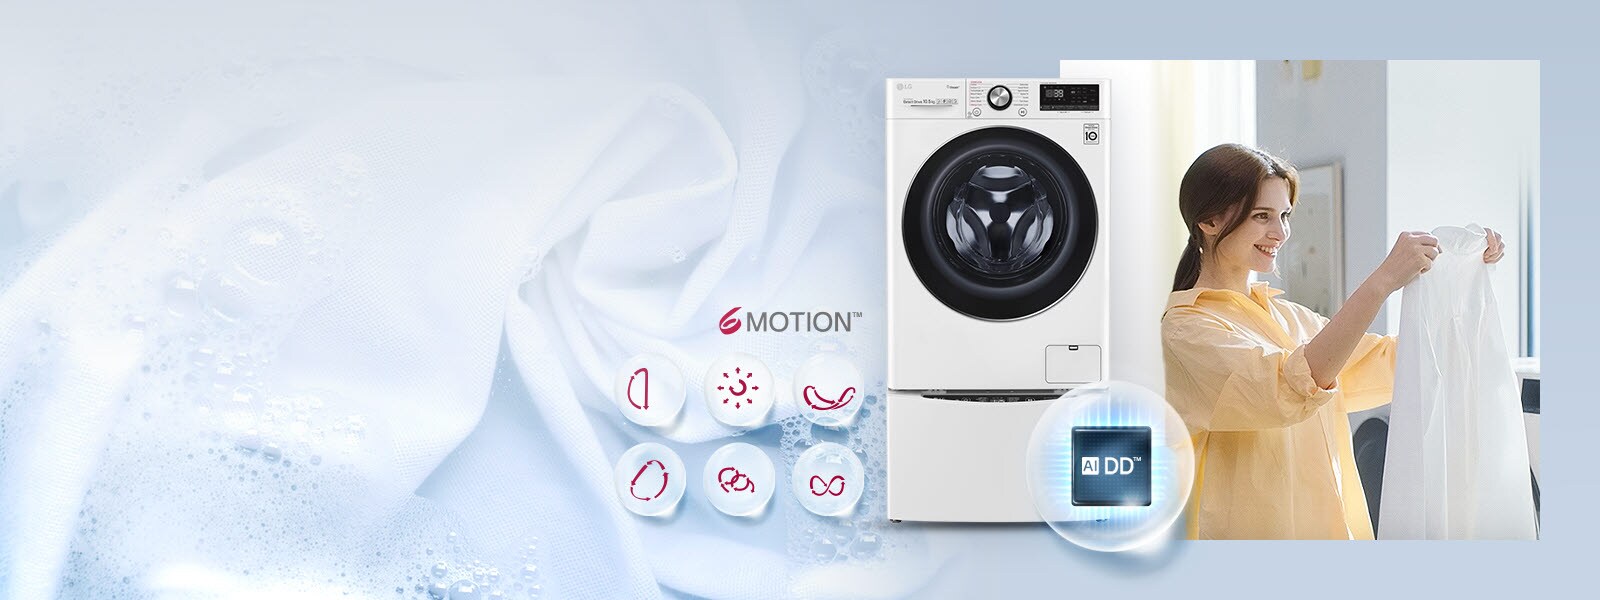 An image shows a woman smiling as she holds up a clean white shirt. Beside her is the front view of an LG washer. There's a bubble in front of the washer that has the AI DD logo. The background image is white linen in sudsy water. On top of it is the SMotion Logo and beneath it are the 6 motions represented by lines and arrows.